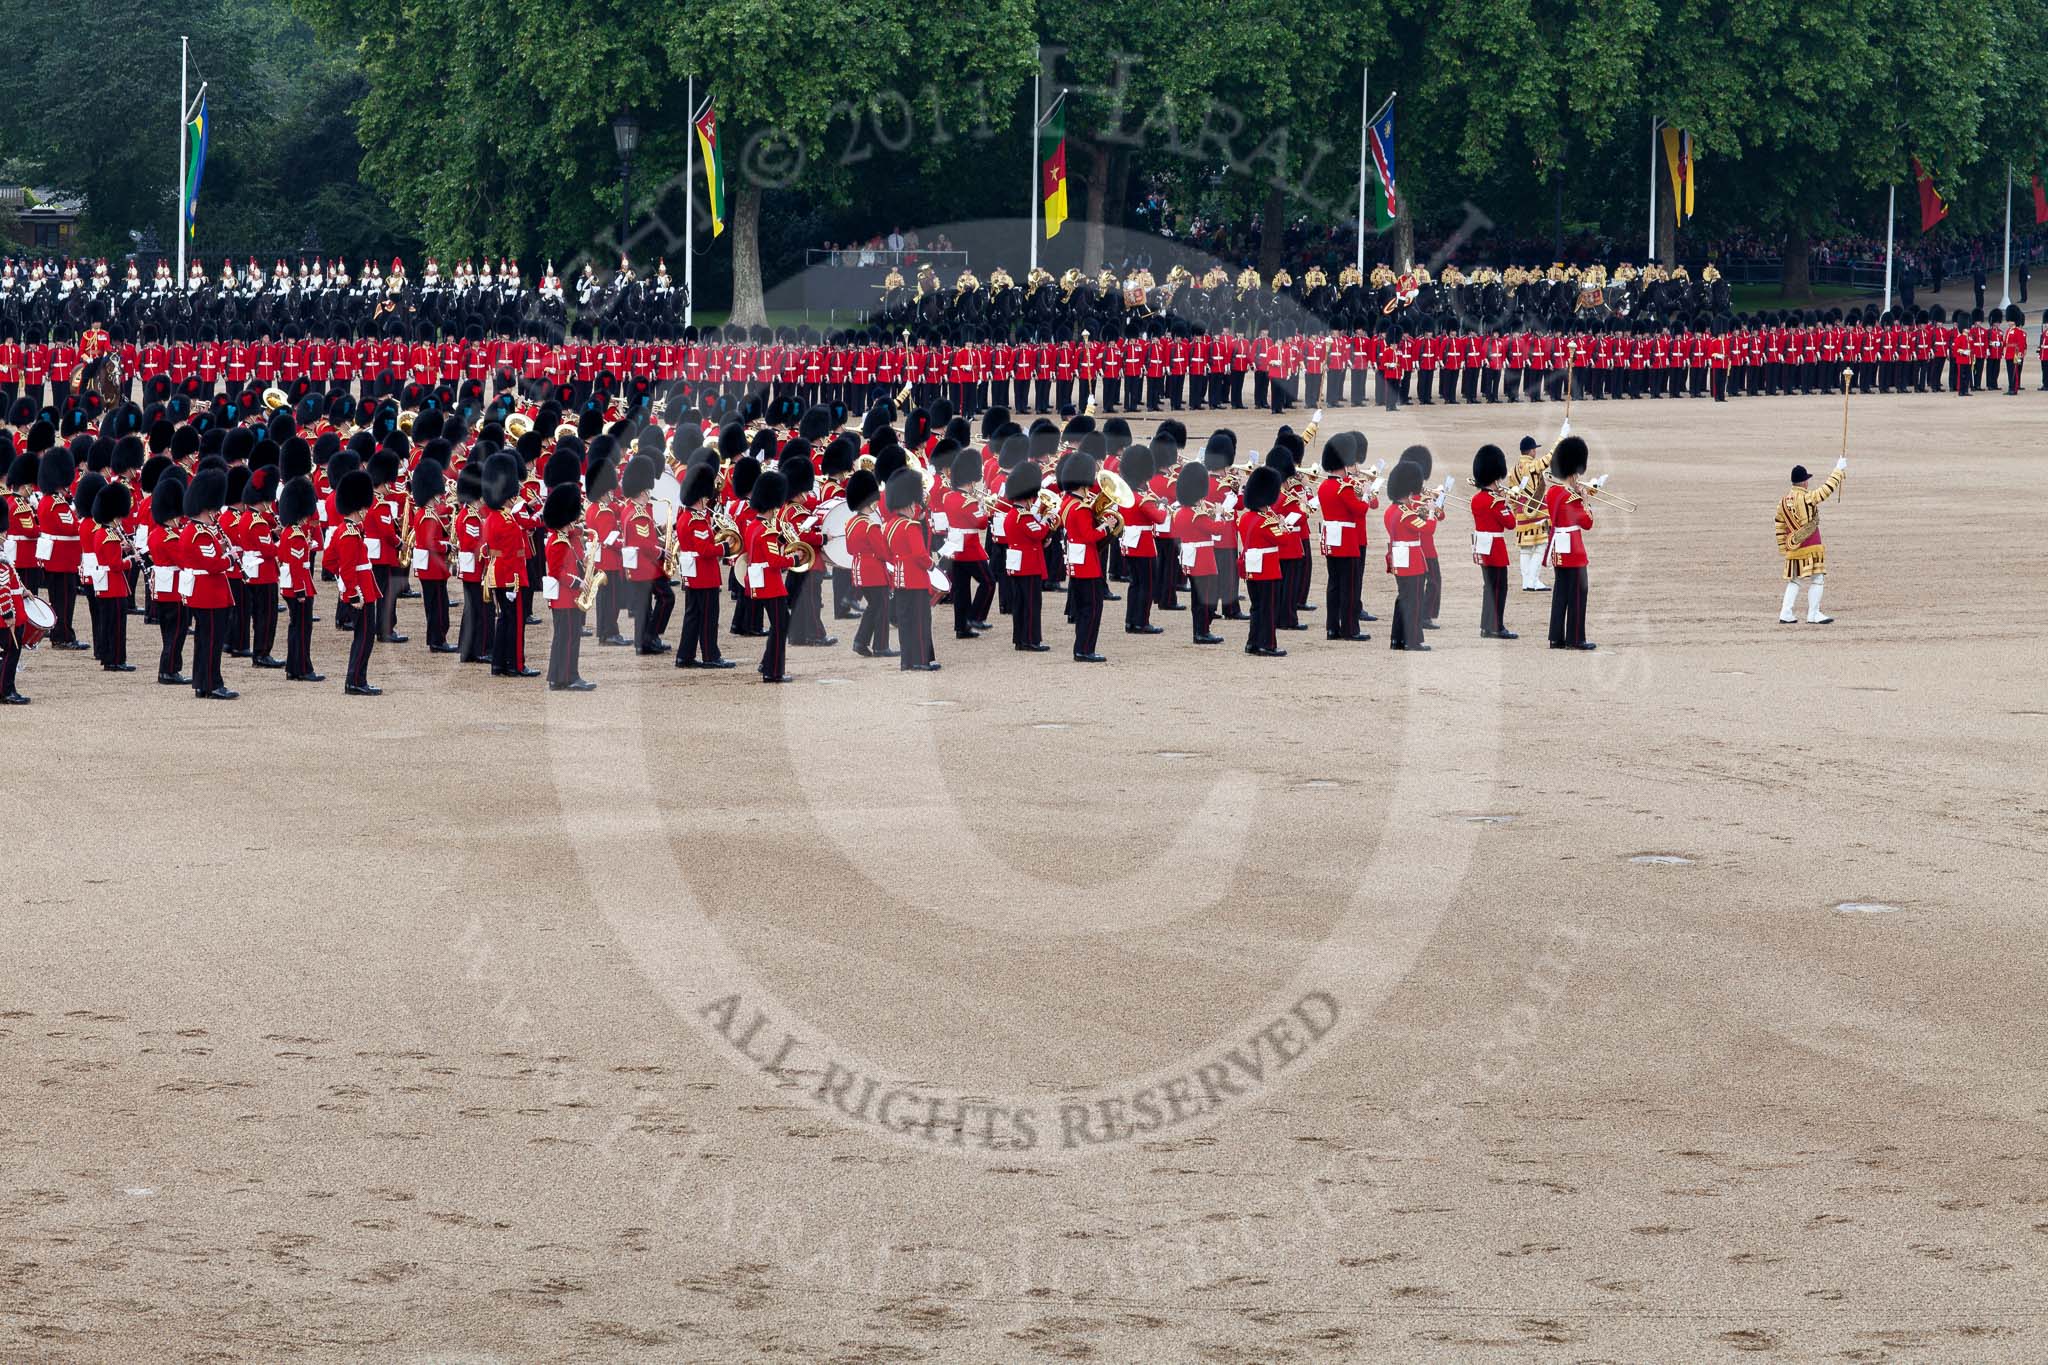 Trooping the Colour 2011: The Massed Bands playing, lead by the drum majors, during the Massed Bands Troop..
Horse Guards Parade, Westminster,
London SW1,
Greater London,
United Kingdom,
on 11 June 2011 at 11:14, image #190